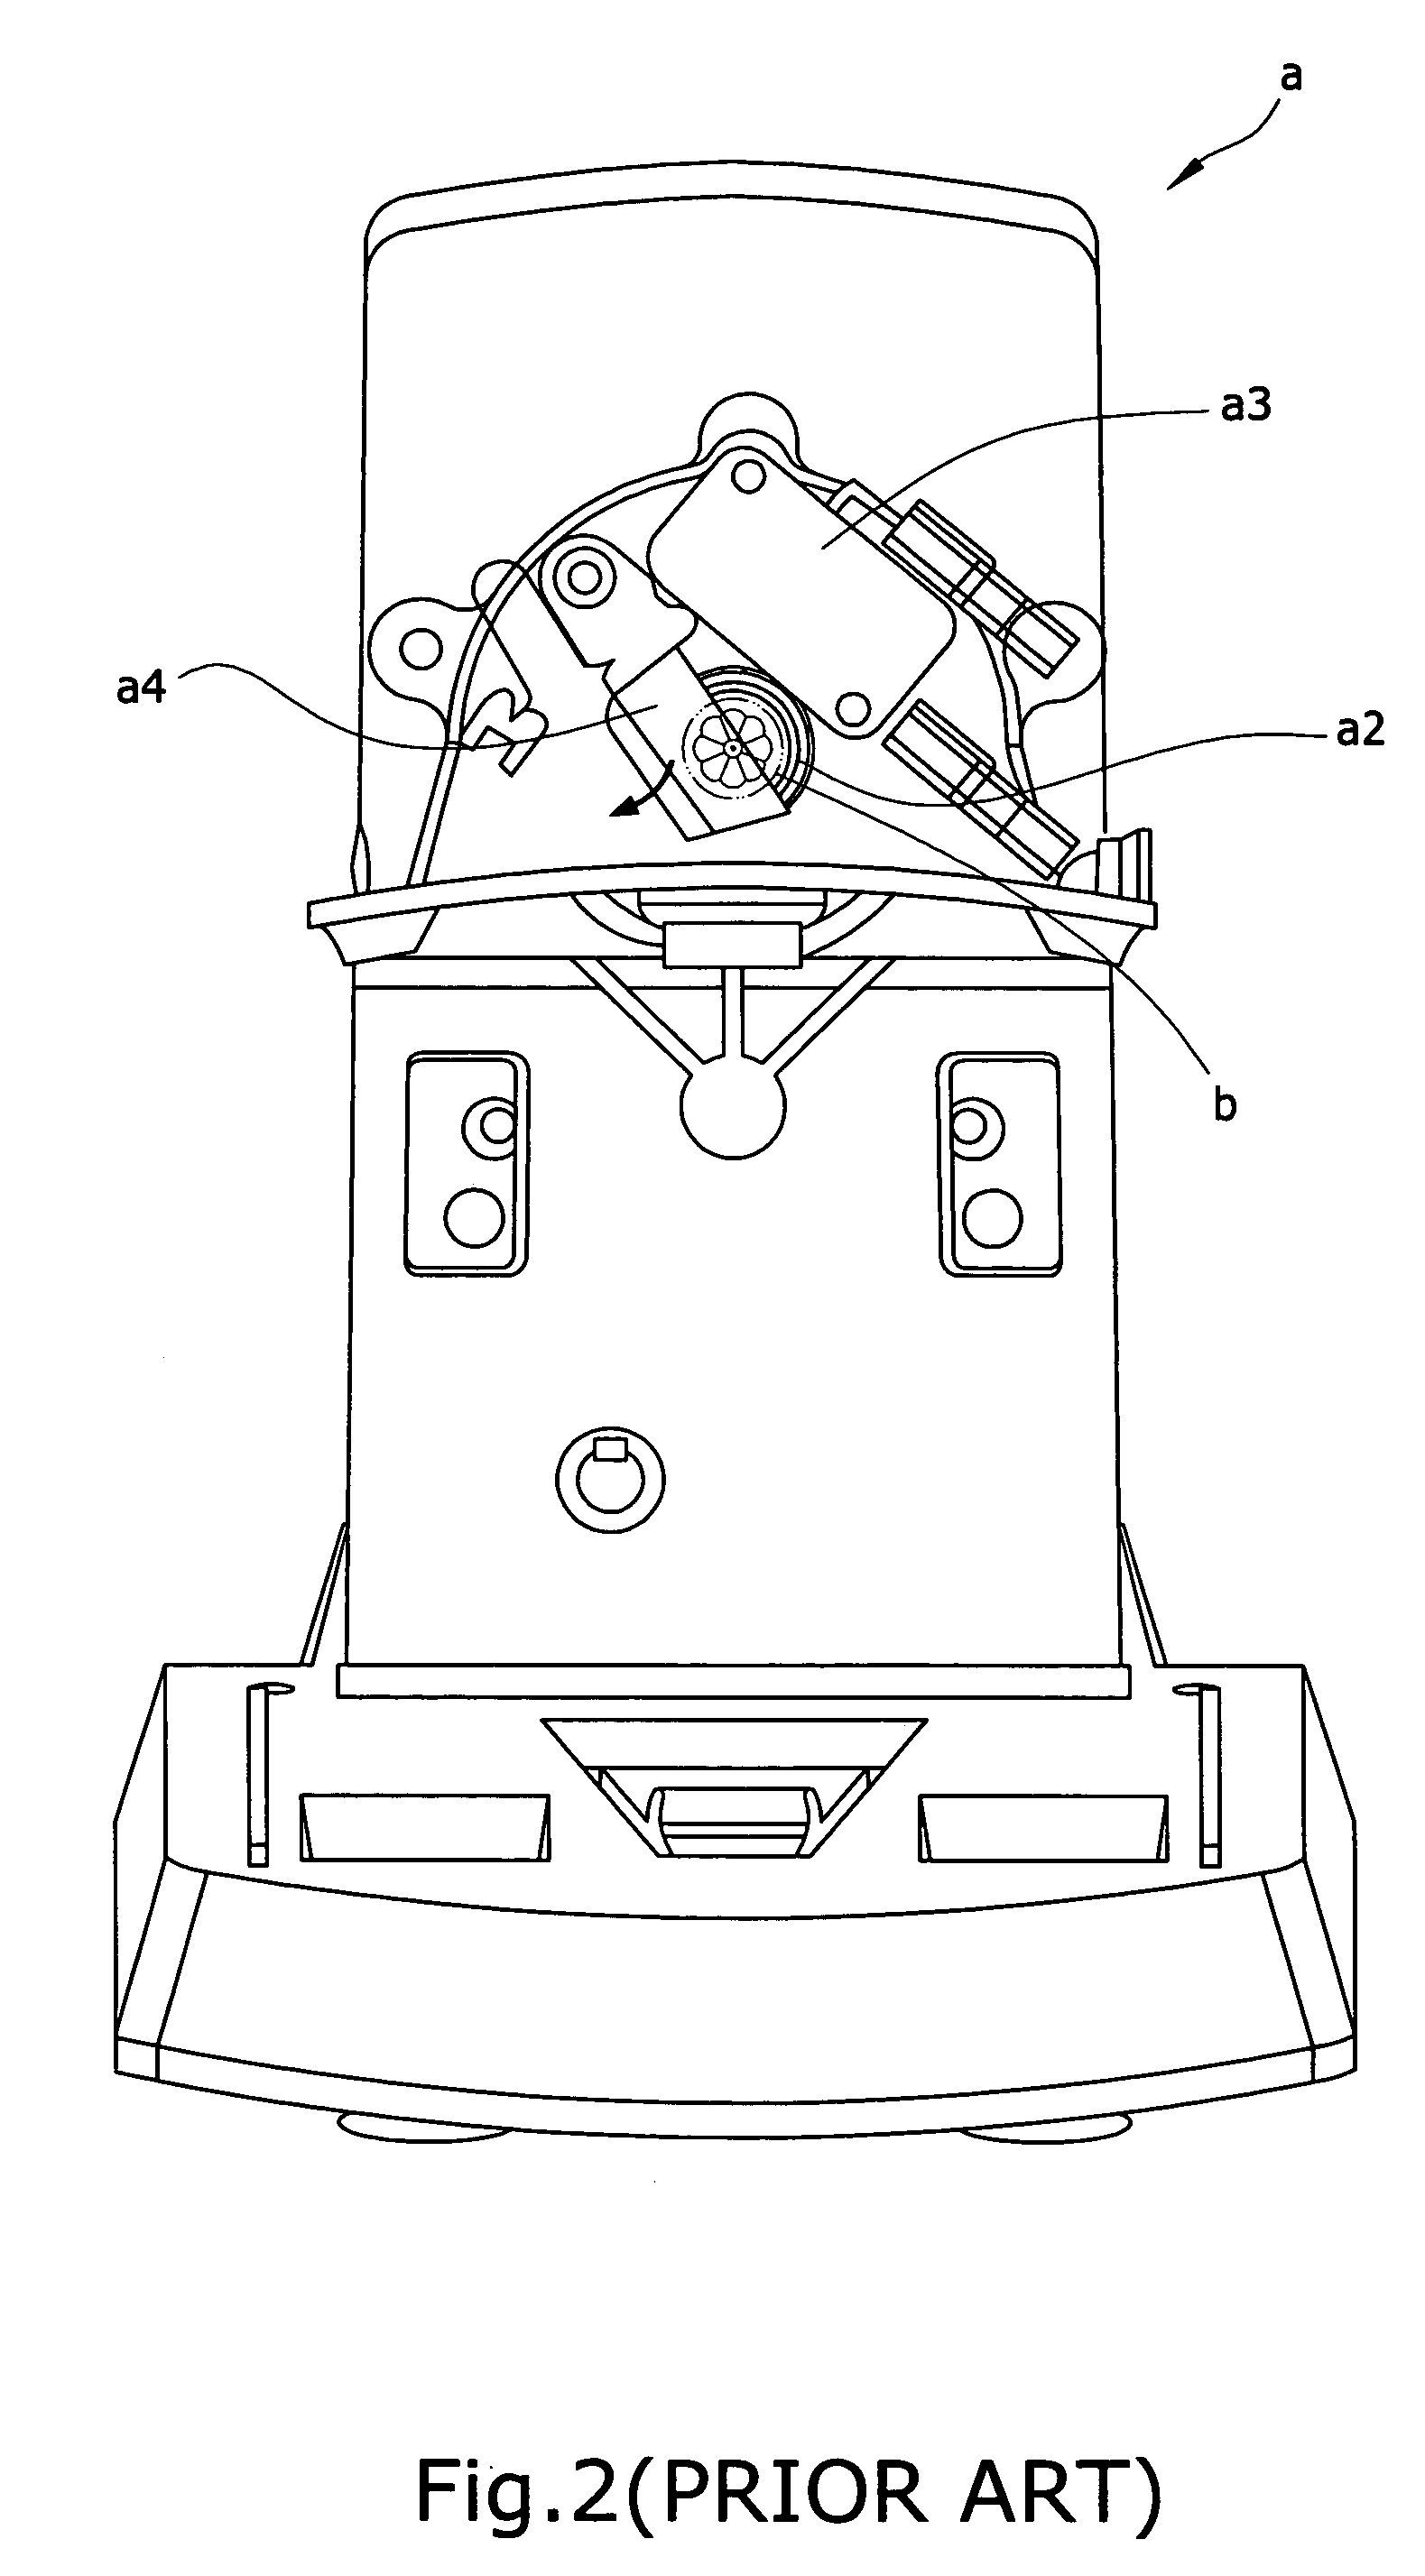 Structure of automatic pencil sharpener